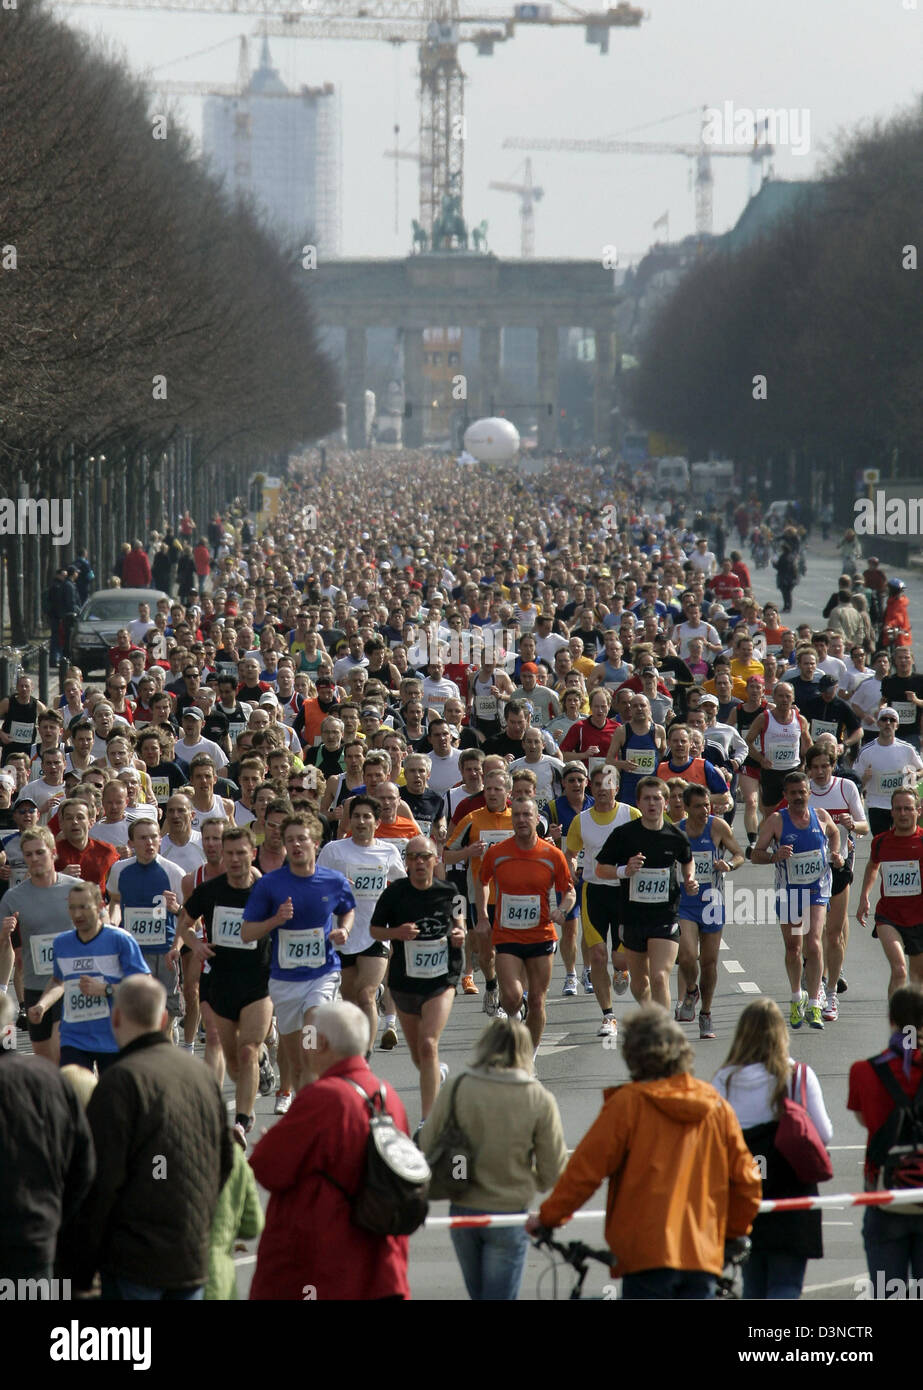 Several thousand people start at the half marathon along the 'Street of 17 June' in Berlin, Sunday, 02 April 2006. At the back the Brandenburg Gate. The marathon course covers a distance of 21 kilometre taking the runnes through the downtown area of Berlin. Photo: Peer Grimm Stock Photo